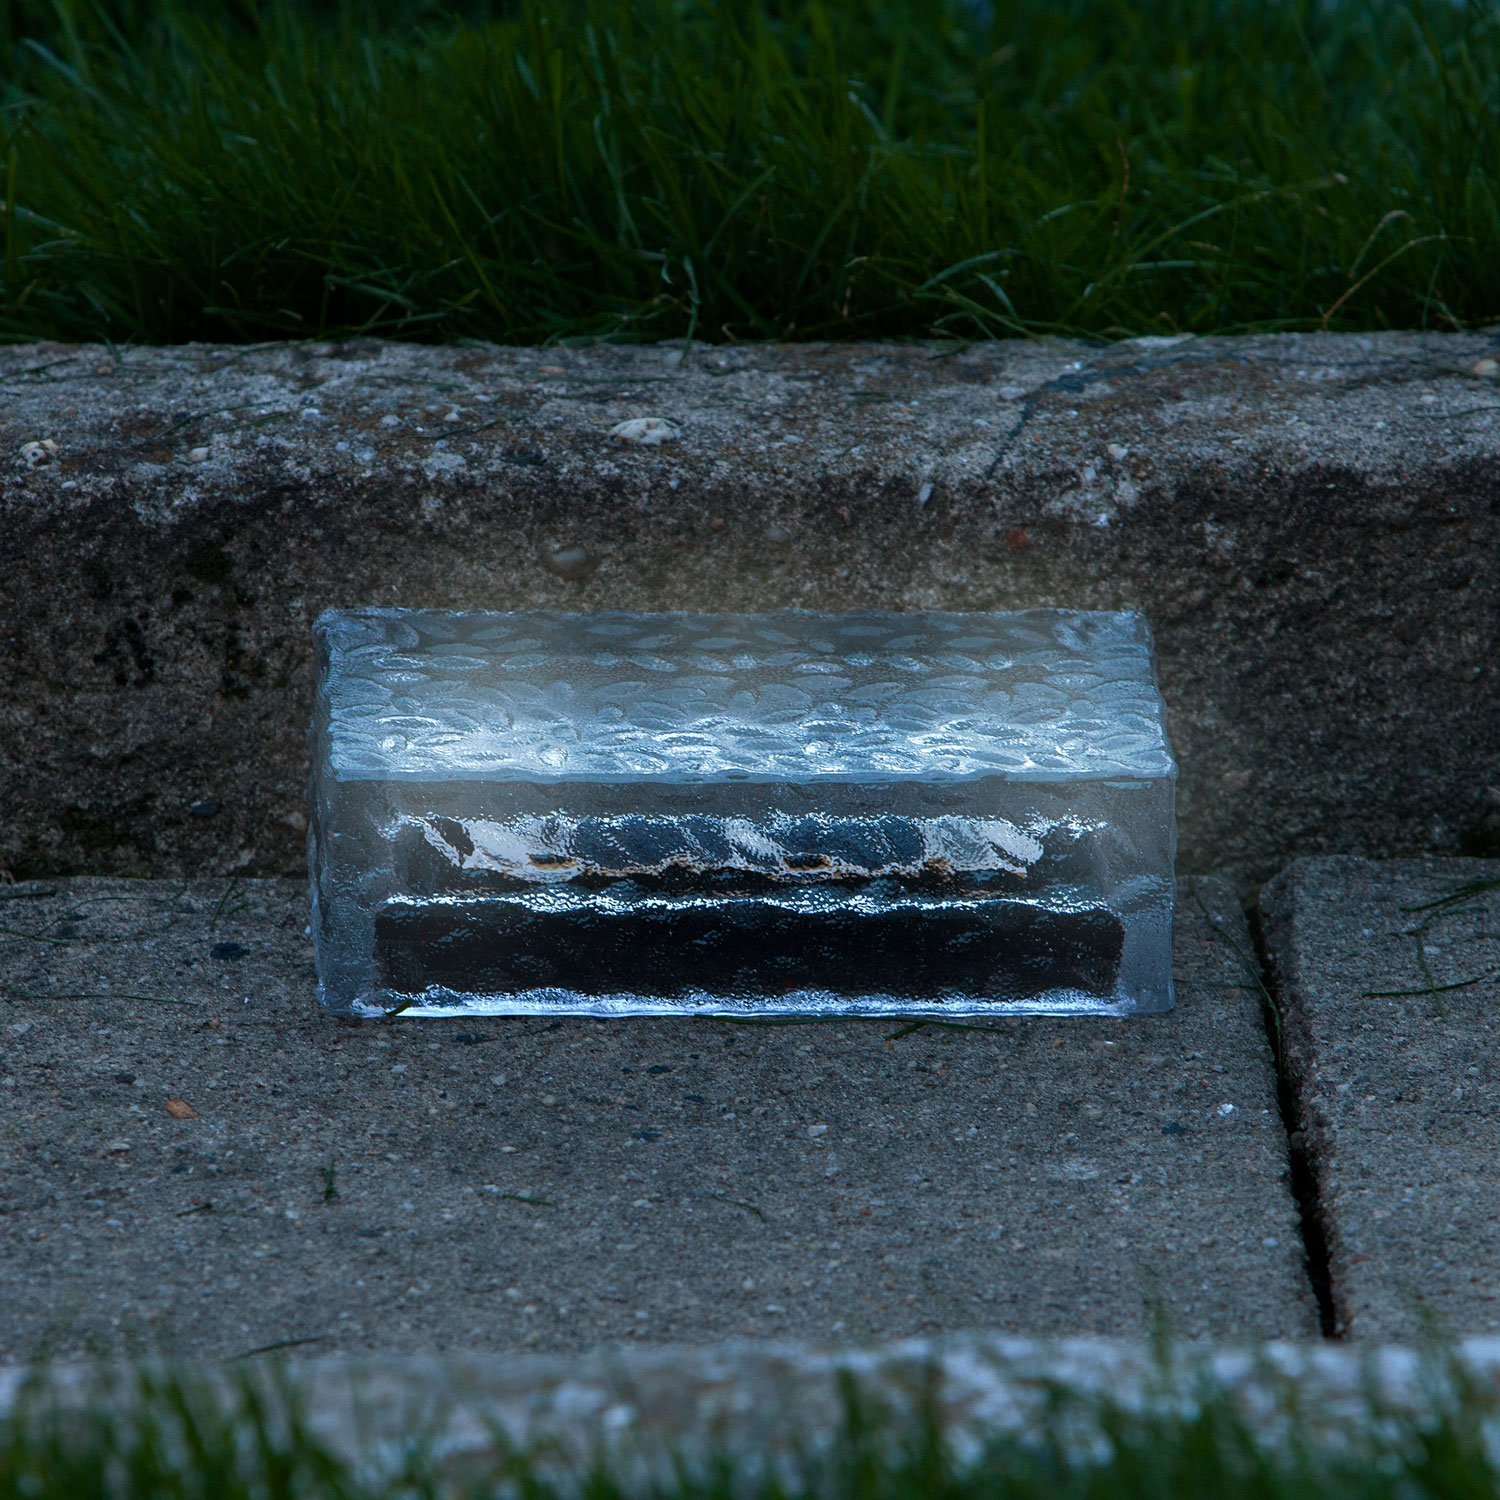 8x4 Solar Brick Landscape Light, 12 White LEDs, Textured Glass Rectangle Paver, Waterproof, Outdoor Use, No Wires Easy to Install - Rechargeable Battery Included Warm White With 6 Leds - $44.95